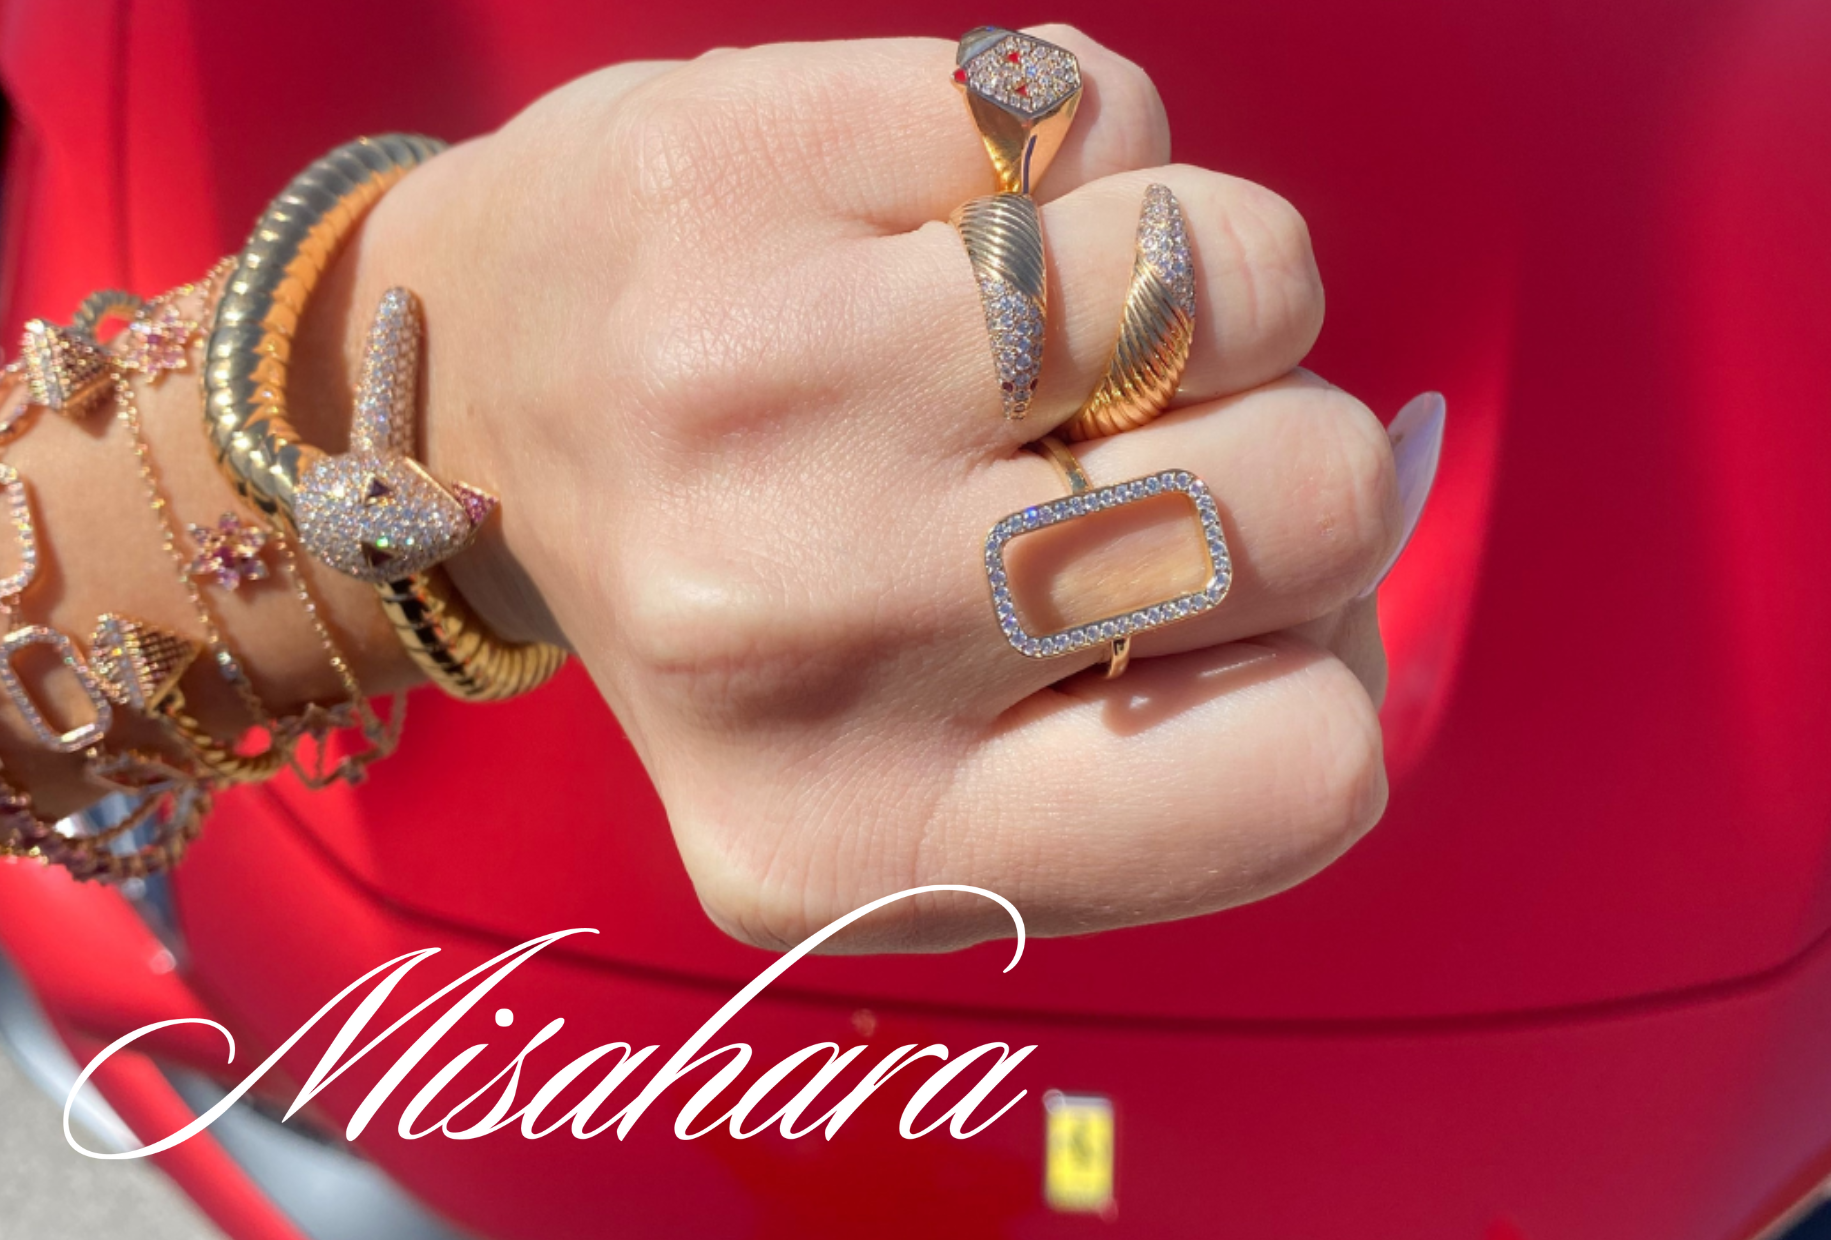 Discover The World of Misahara